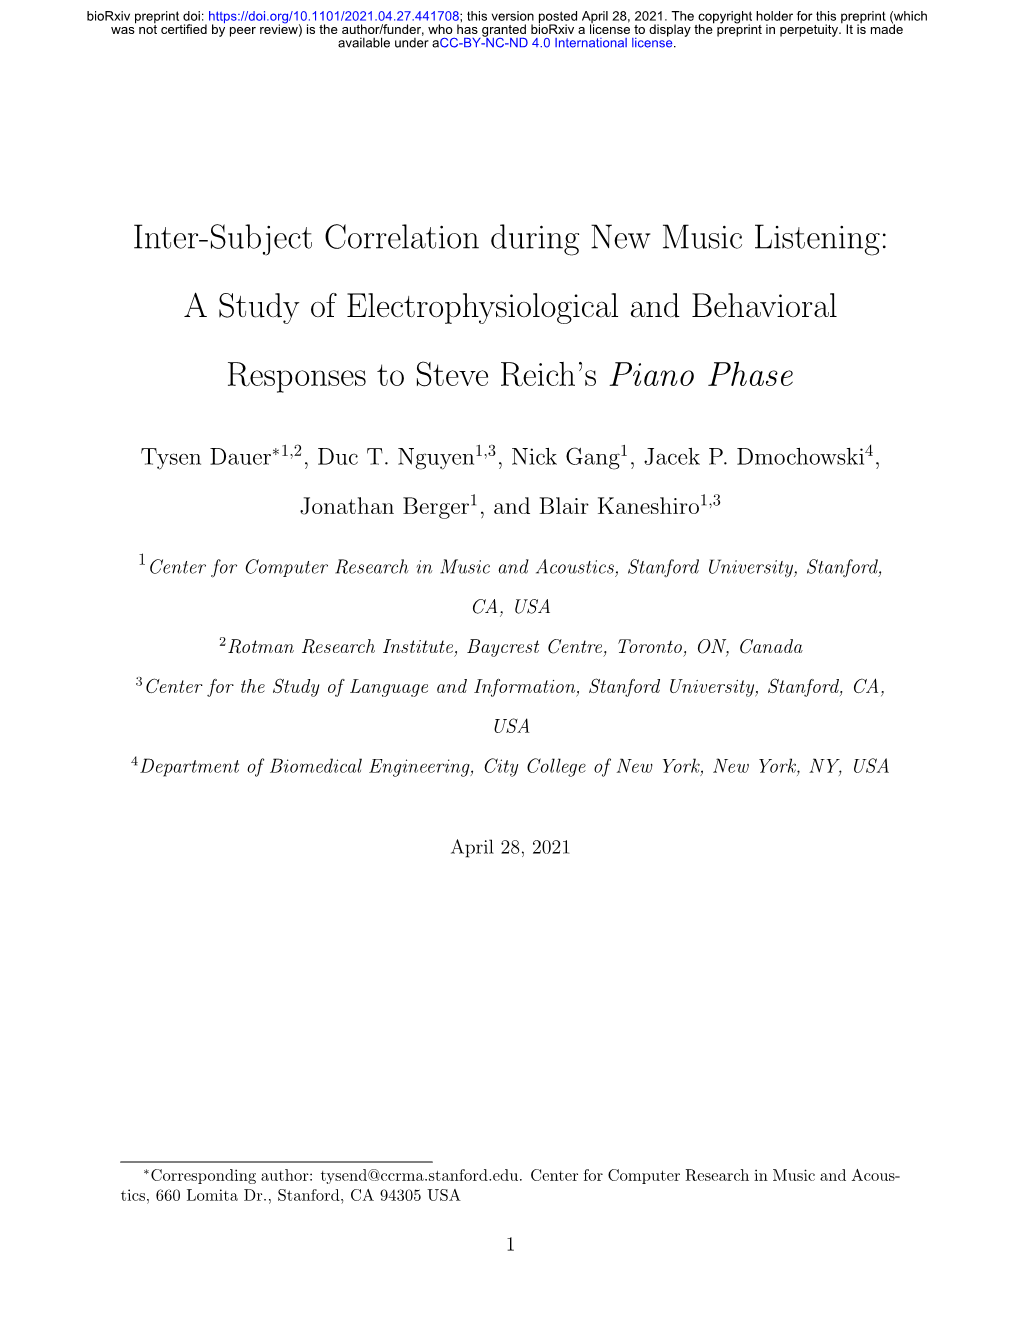 Inter-Subject Correlation During New Music Listening: a Study of Electrophysiological and Behavioral Responses to Steve Reich'